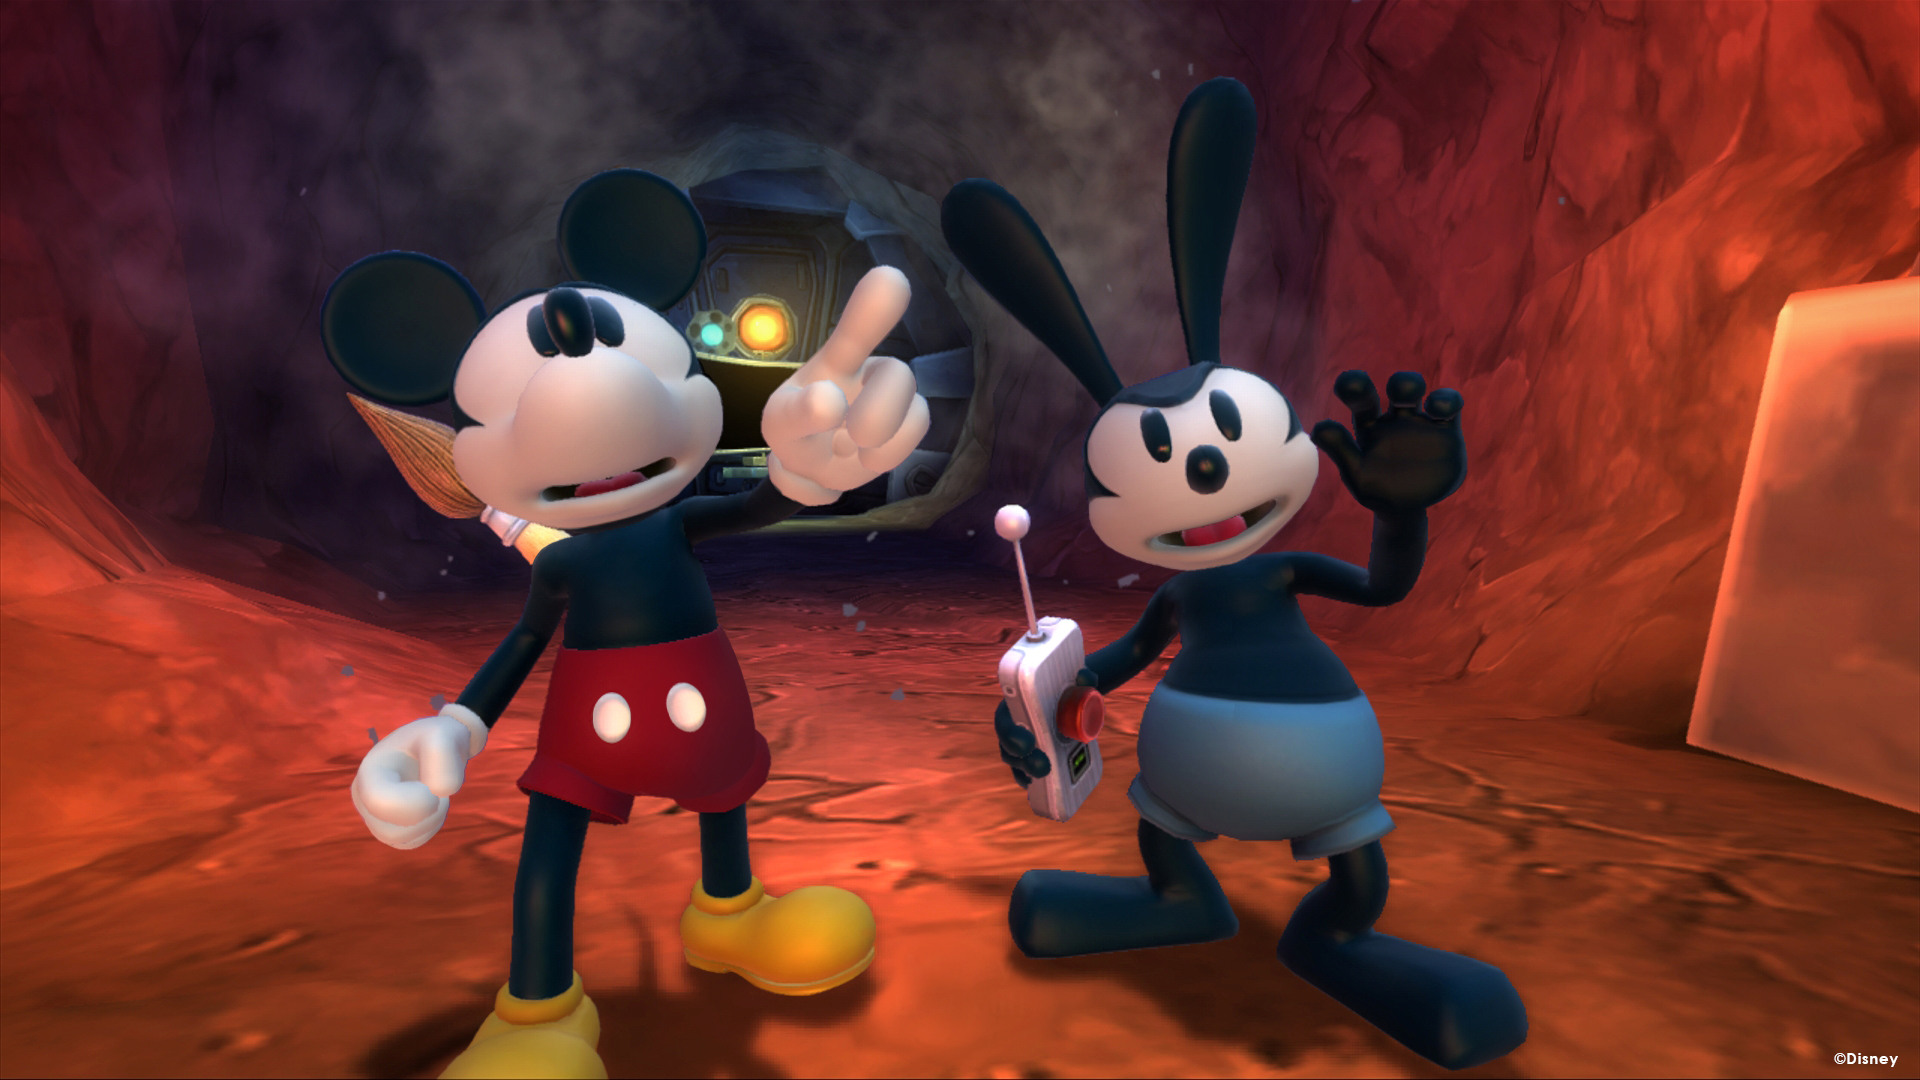 Steam Workshop::Disney's Mickey Mouse